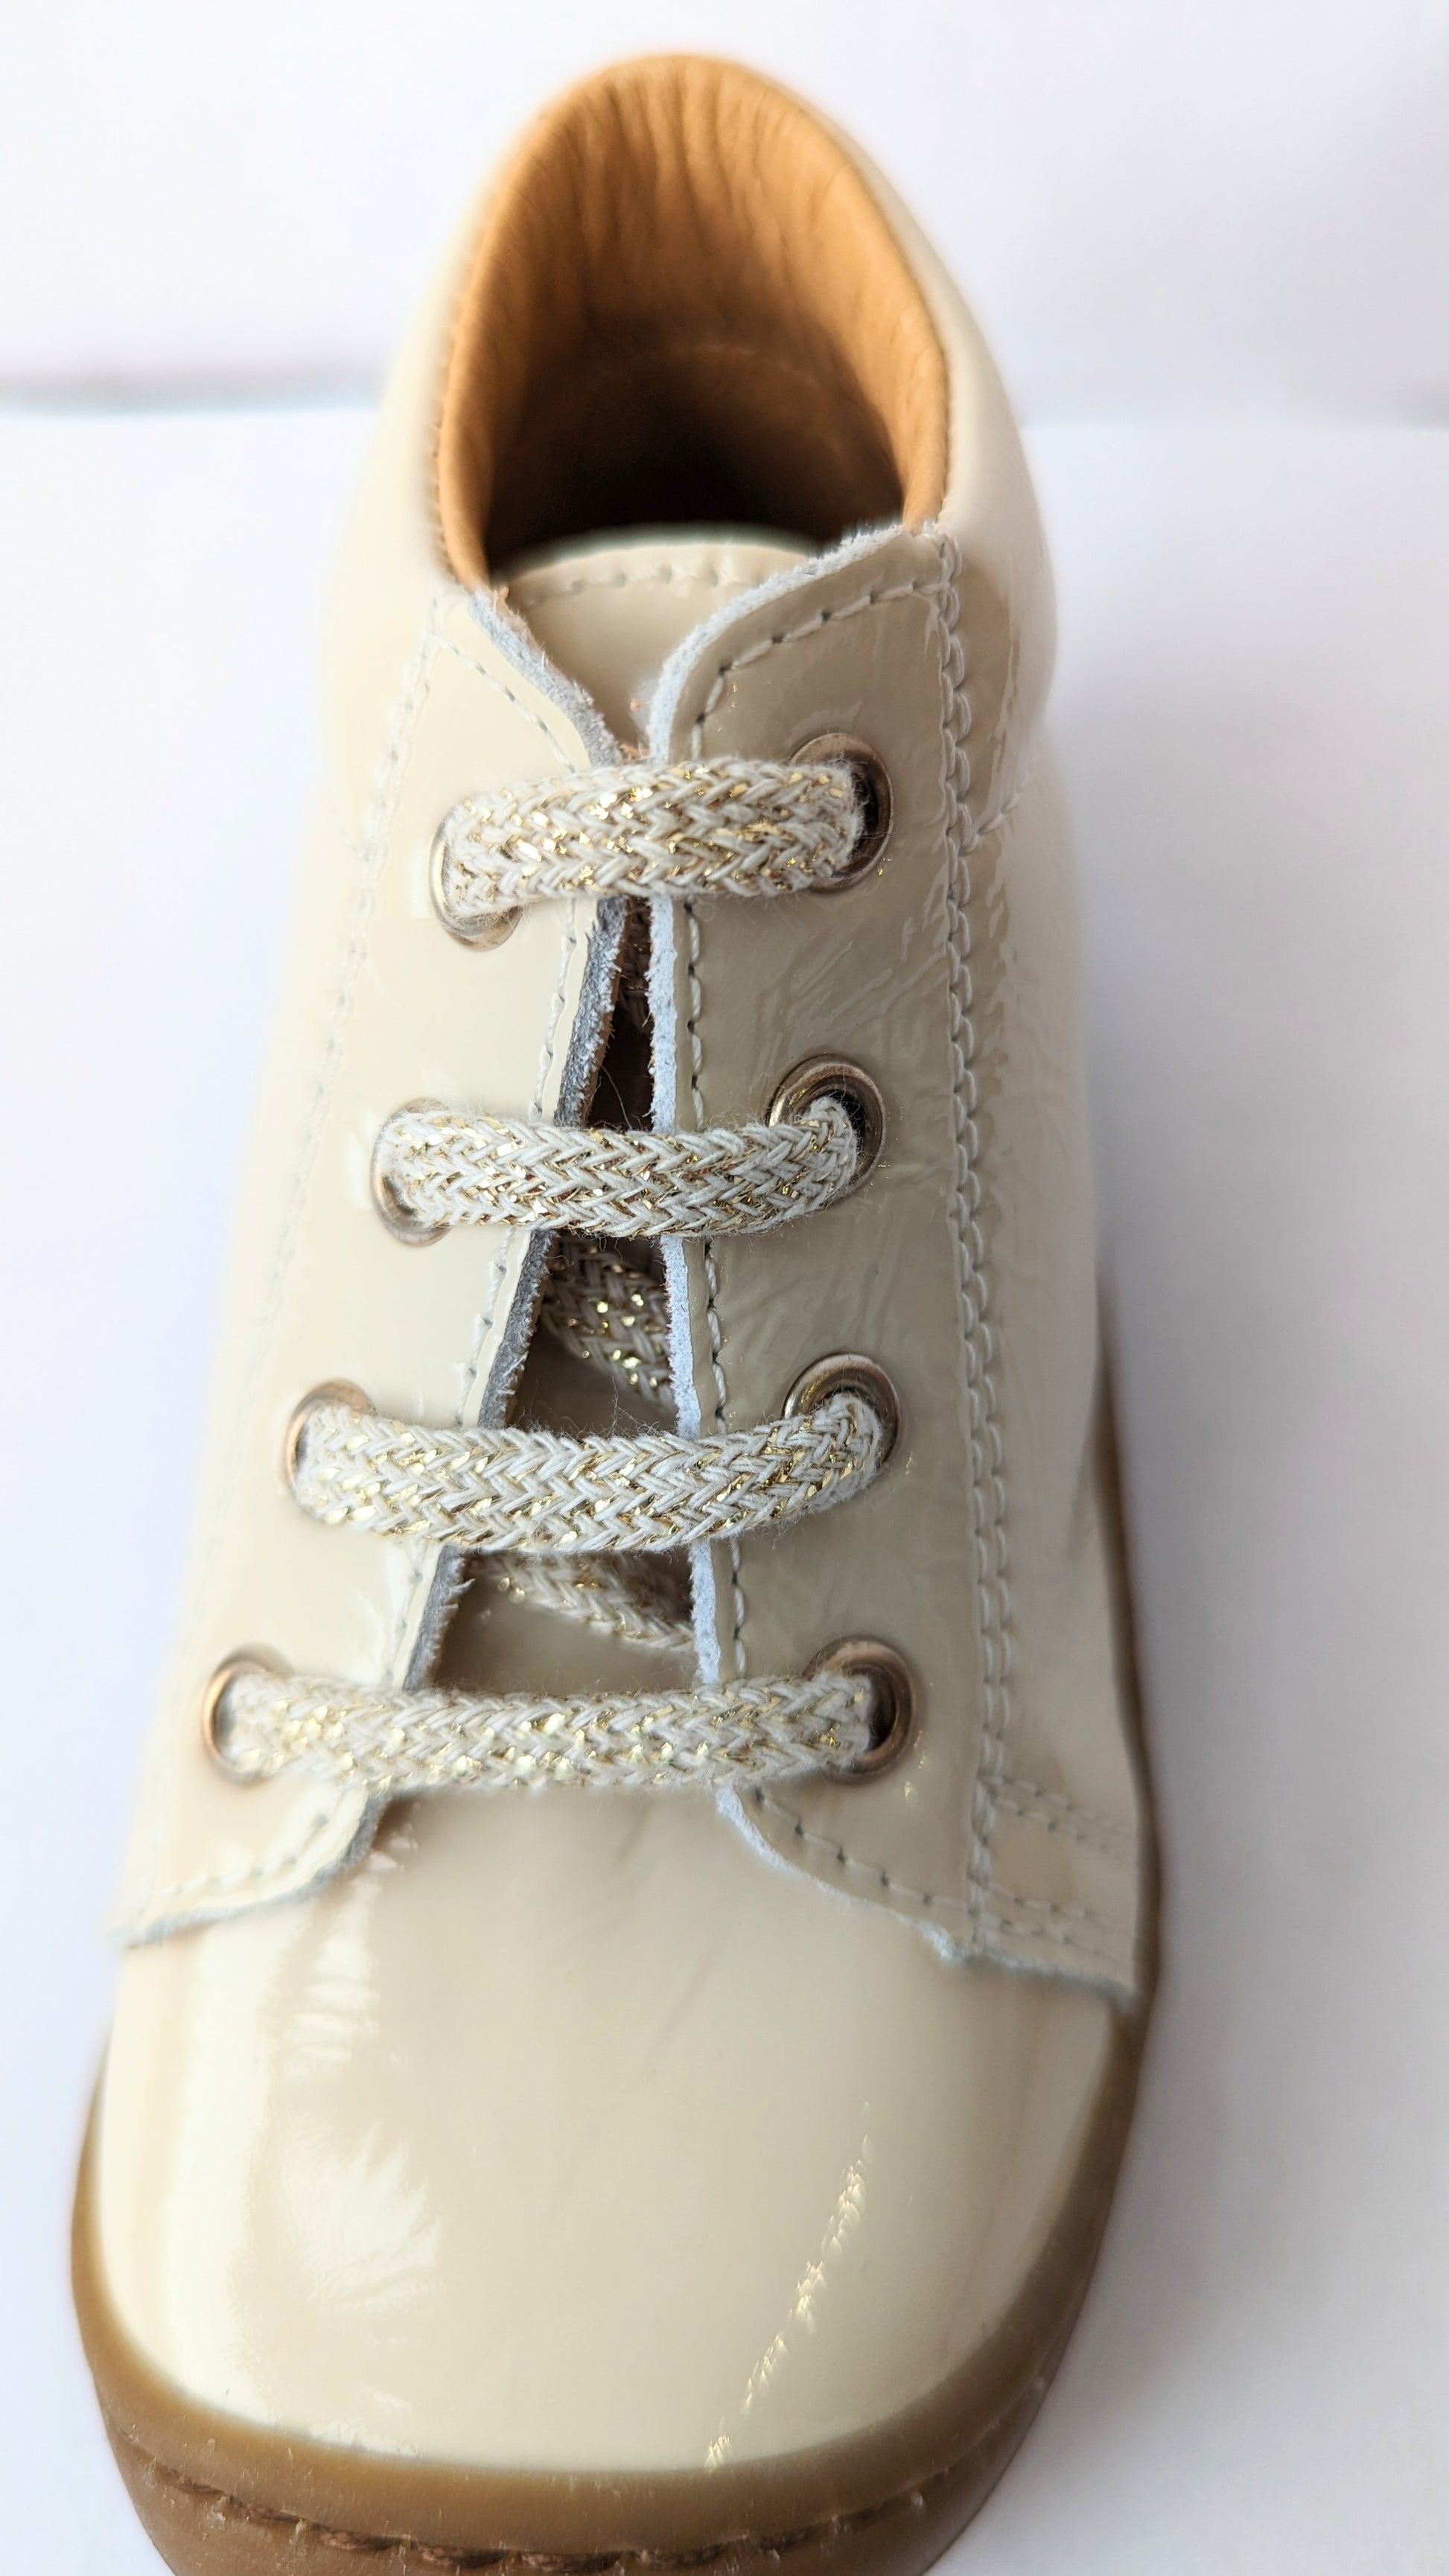 A girls ankle boot by Bopy, style Jordana, in cream crinkled patent with toe bumper and lace up fastening. Close up view.